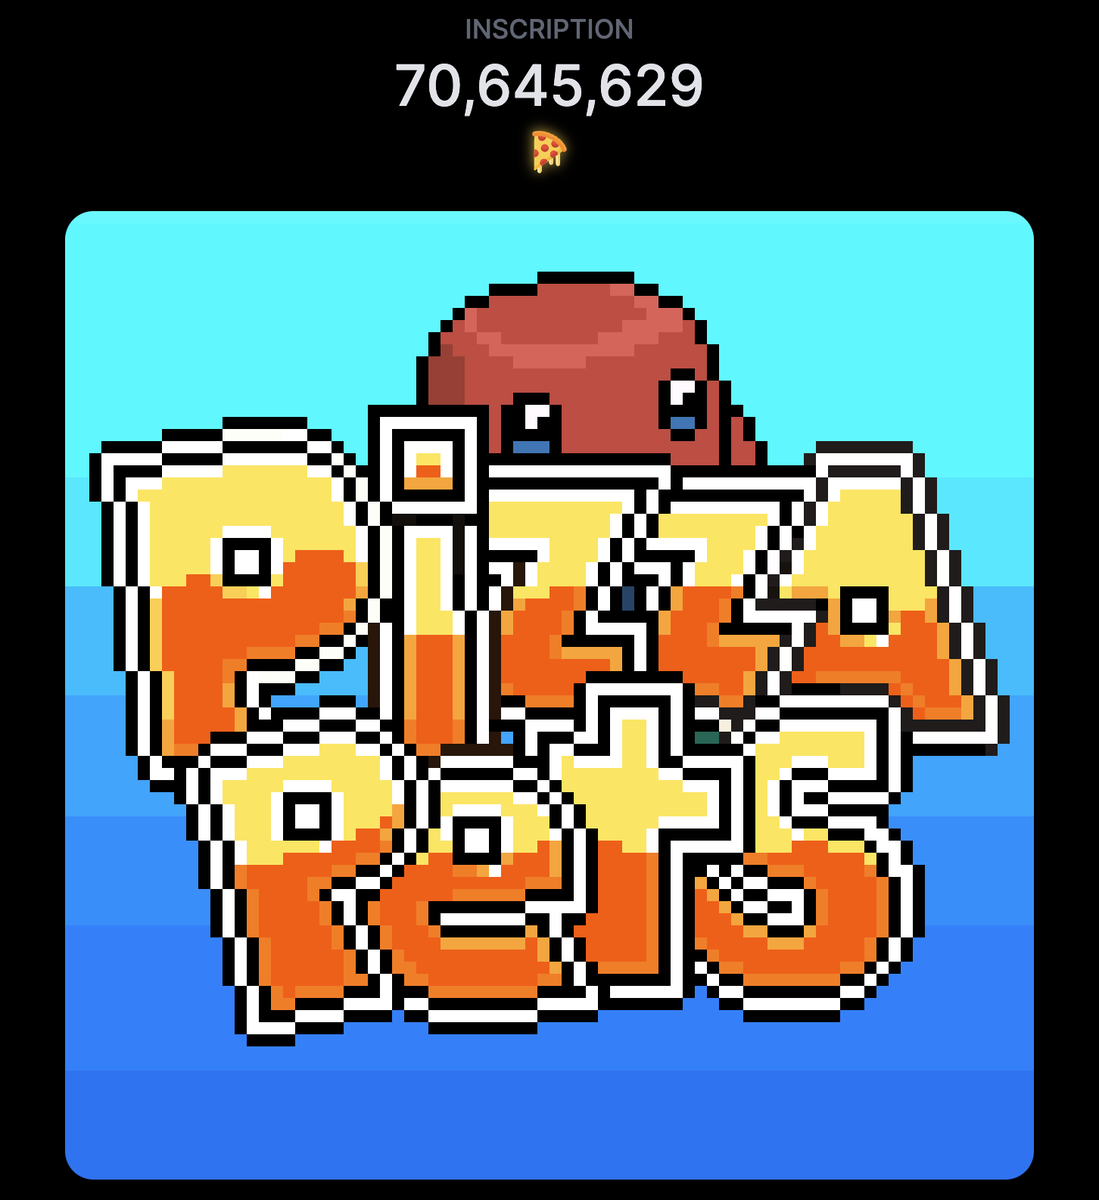 BREAKING: The parent inscription for 'Pizza Pets' an upcoming collaboration between @Pizza_Ninjas and @MegaPunks_BTC was just inscribed! → ord.io/70645629